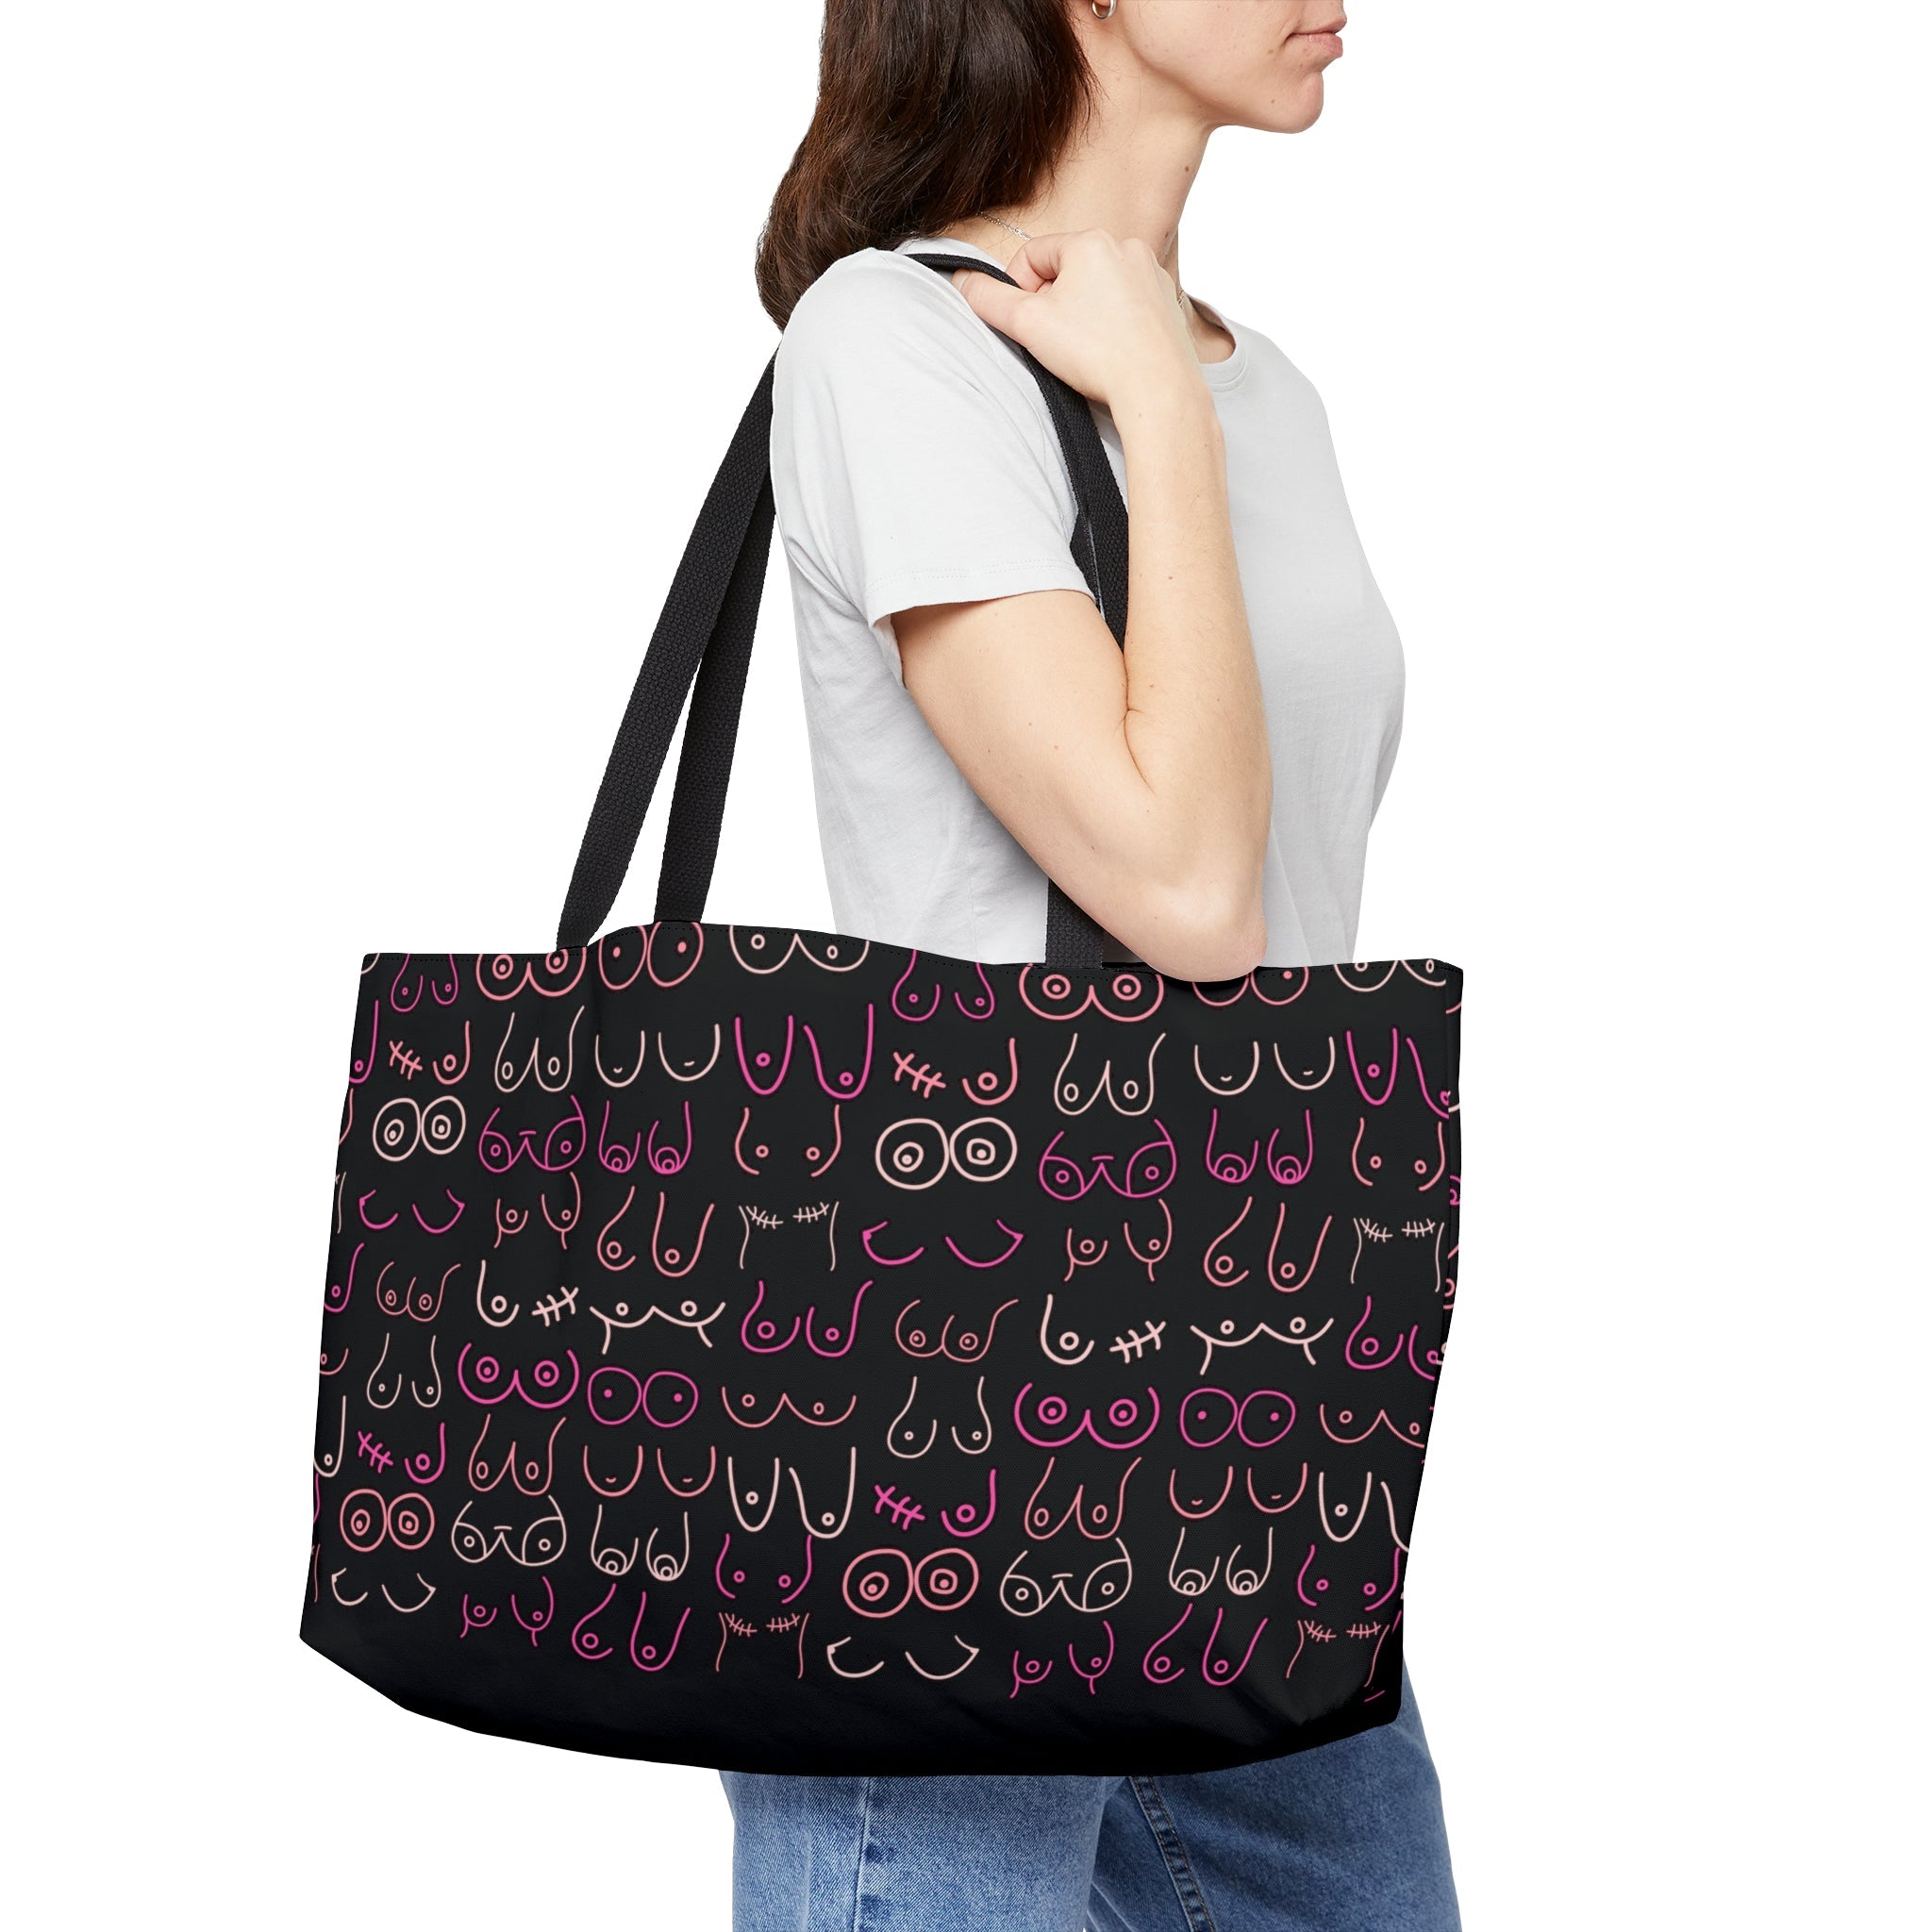 Save The Tatas Large Breast Cancer Awareness Tote Bag - The Kindness Cause